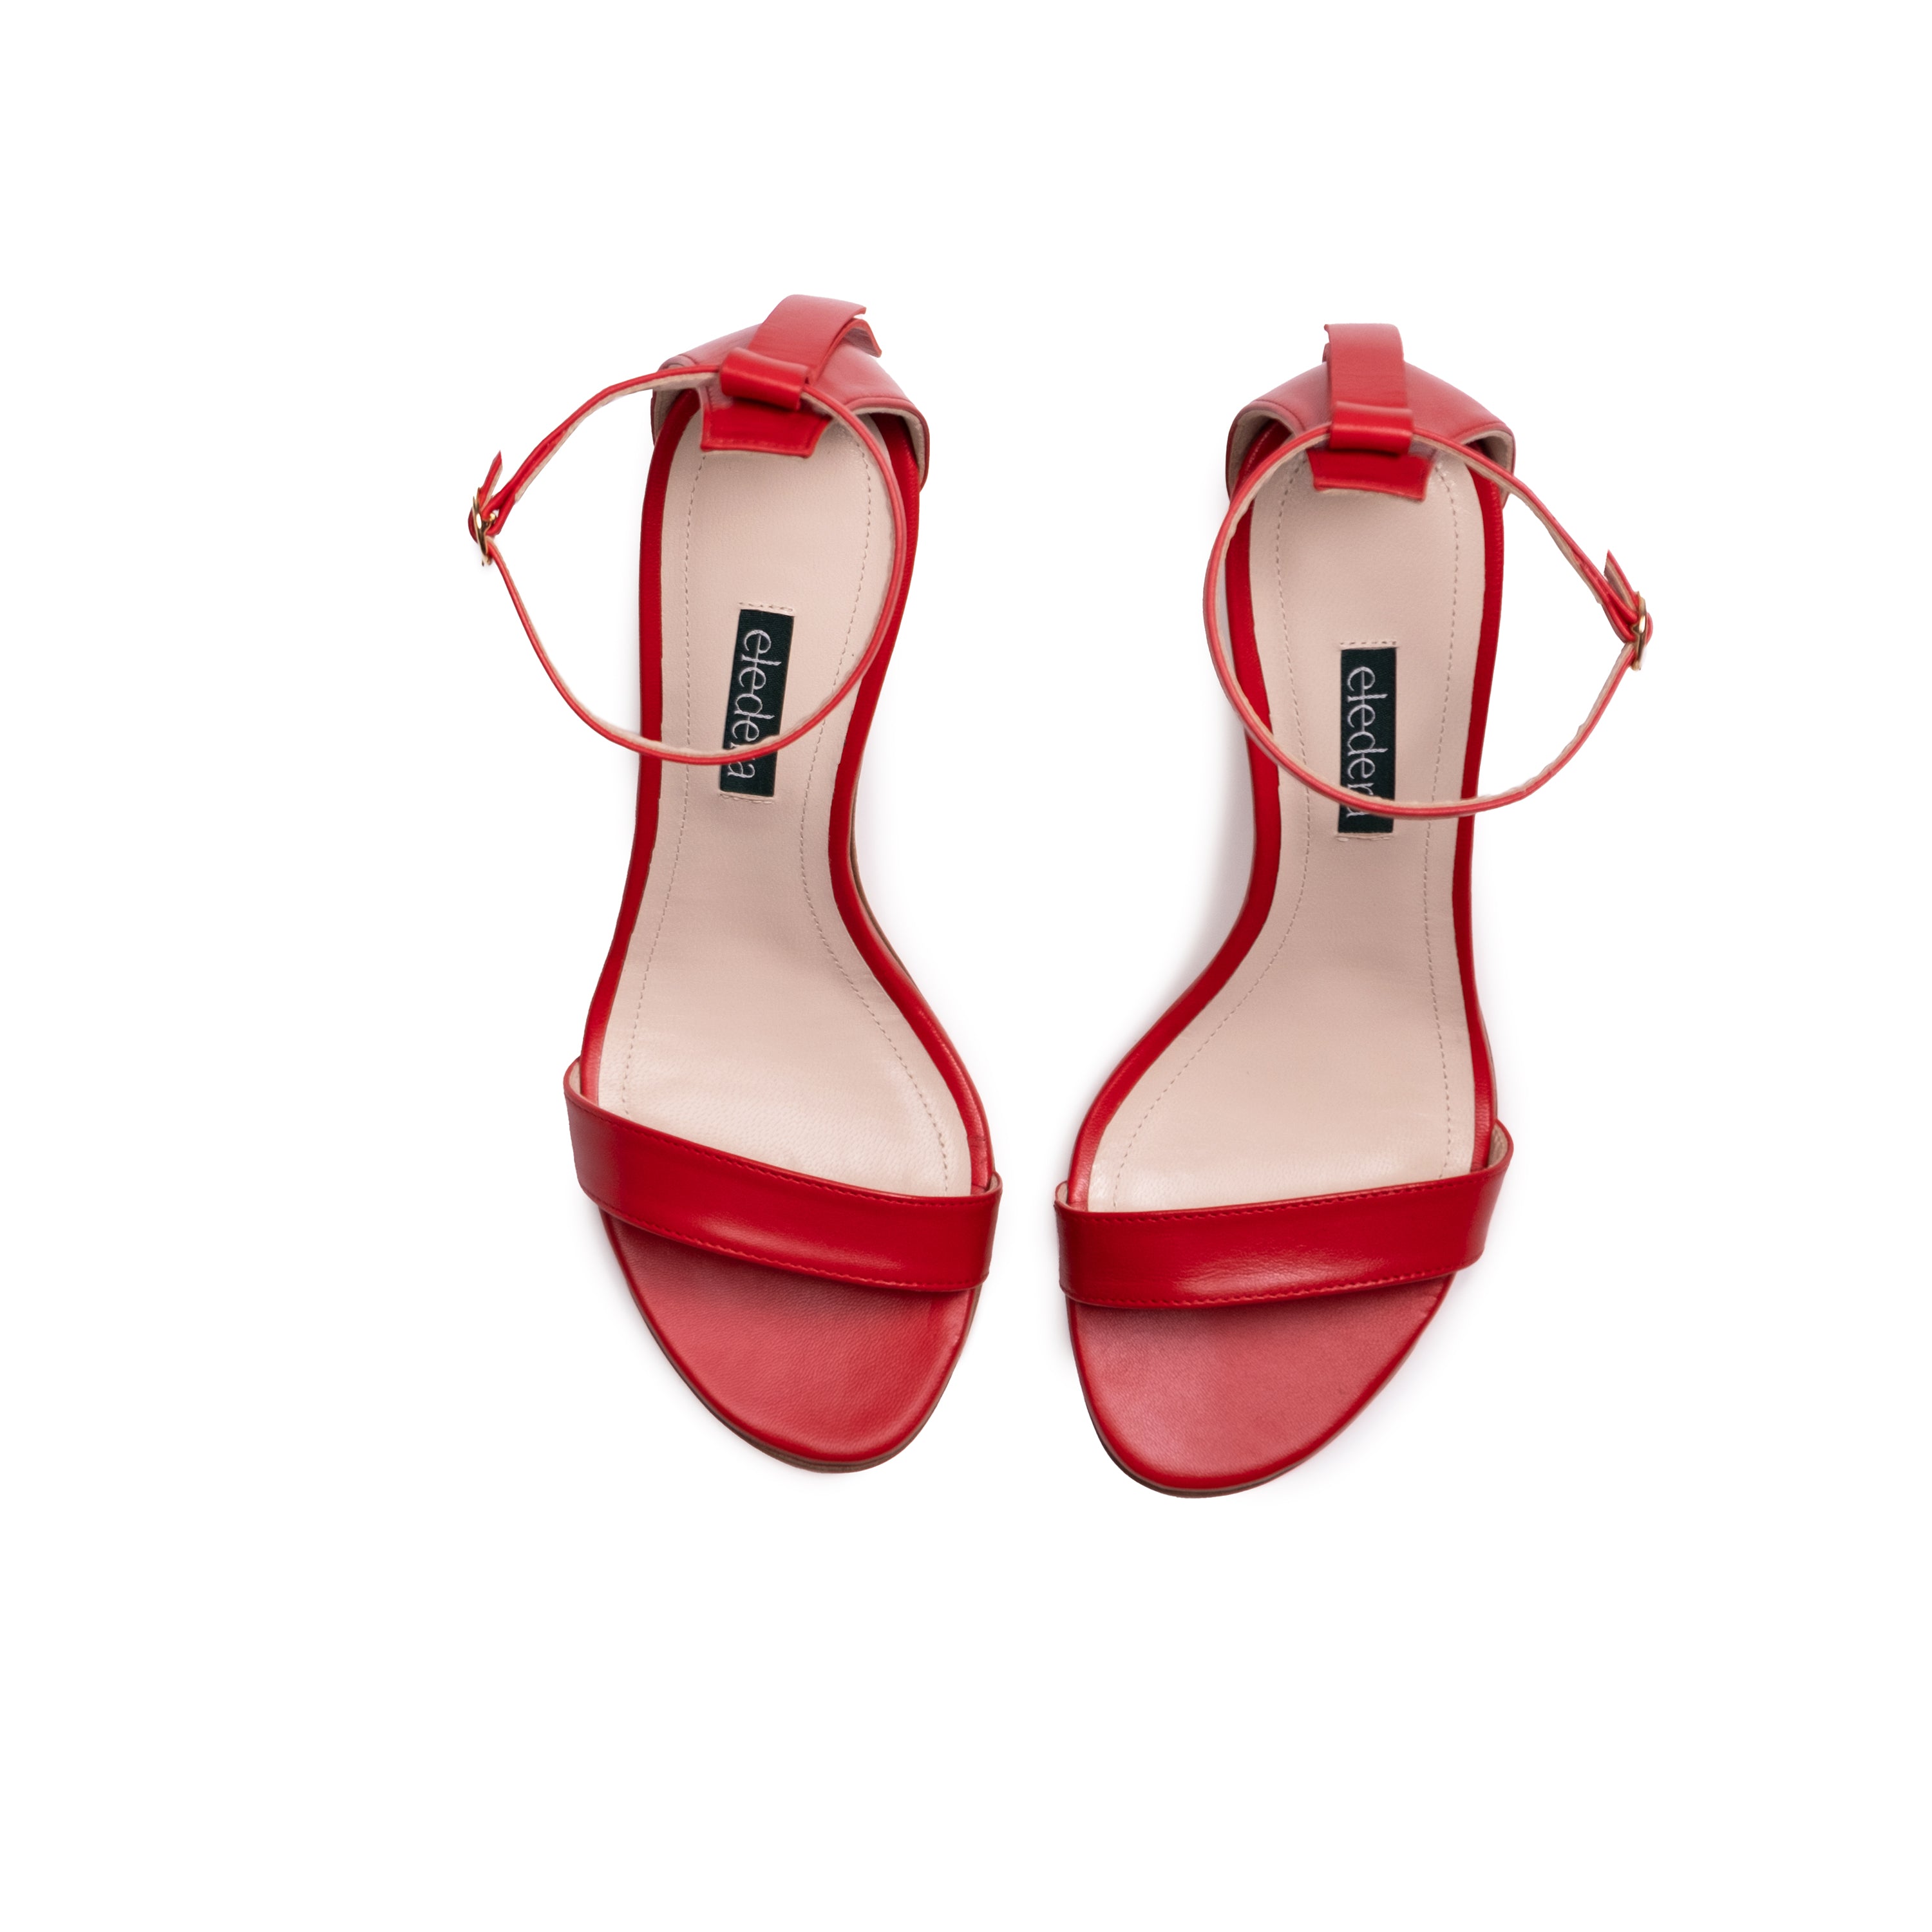 The Eledera Tacco in red nappa leather, 7cm heel, adjustable strap with golden buckle and embellished tassel on the back. 